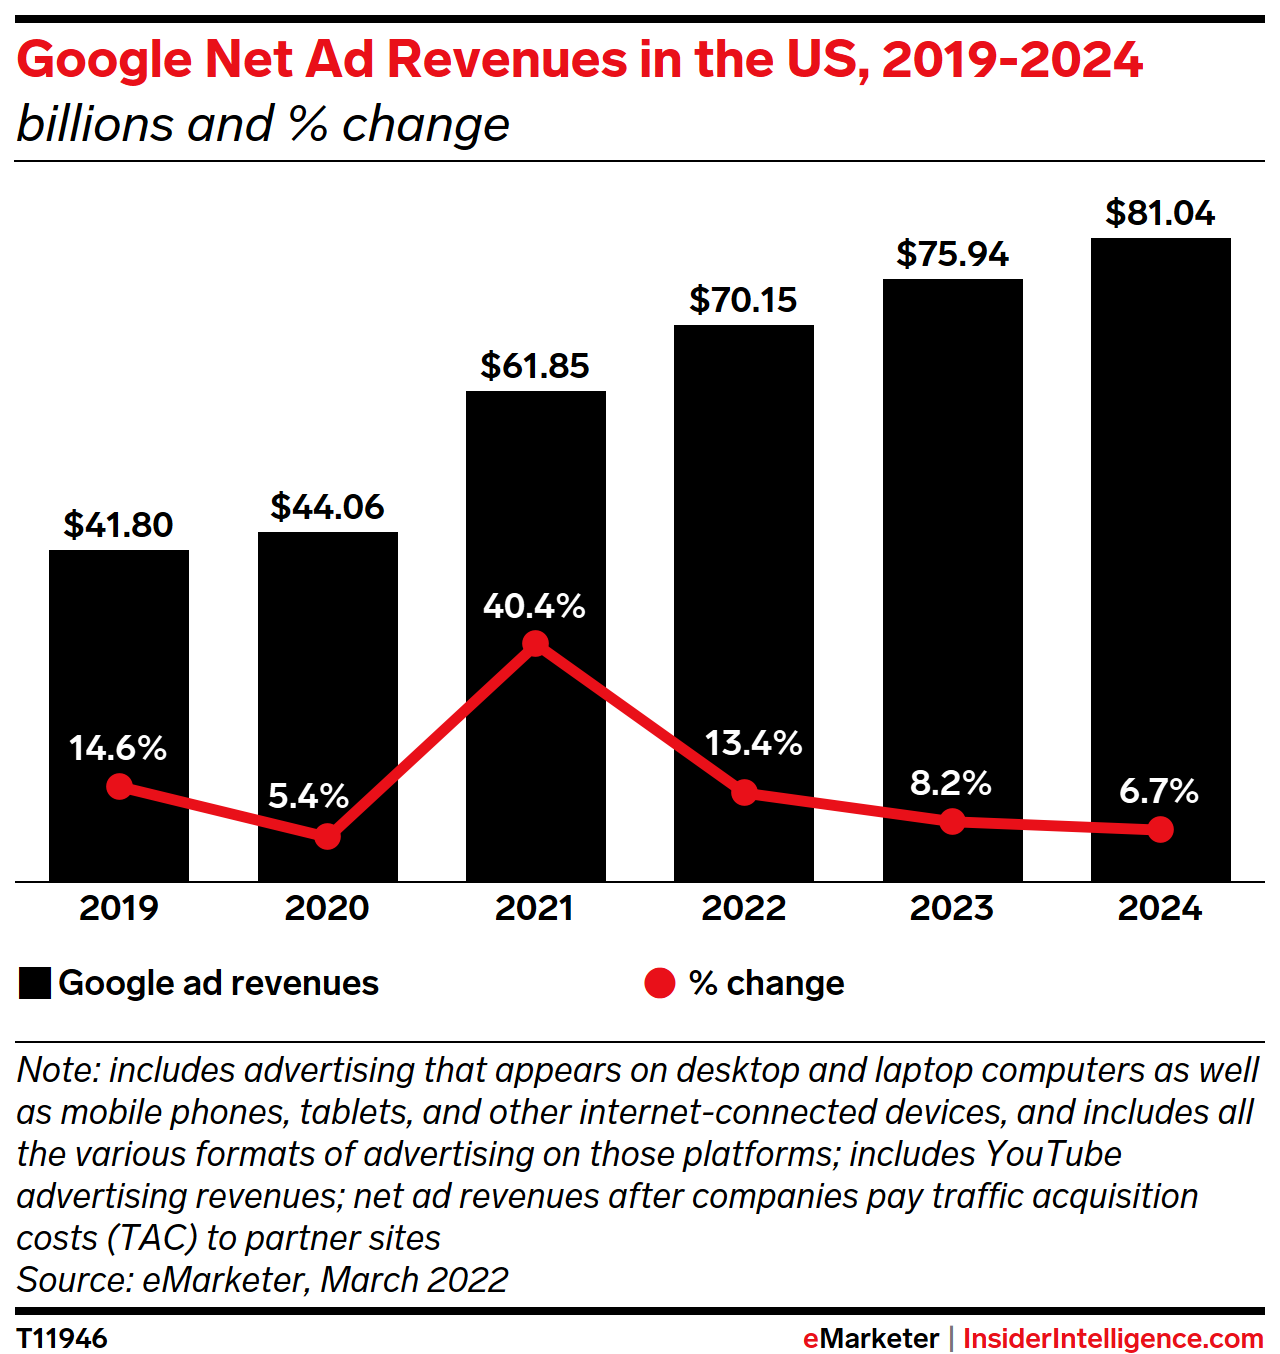 Google Ad Revenues in the US, 2019-2024 (billions and % change)